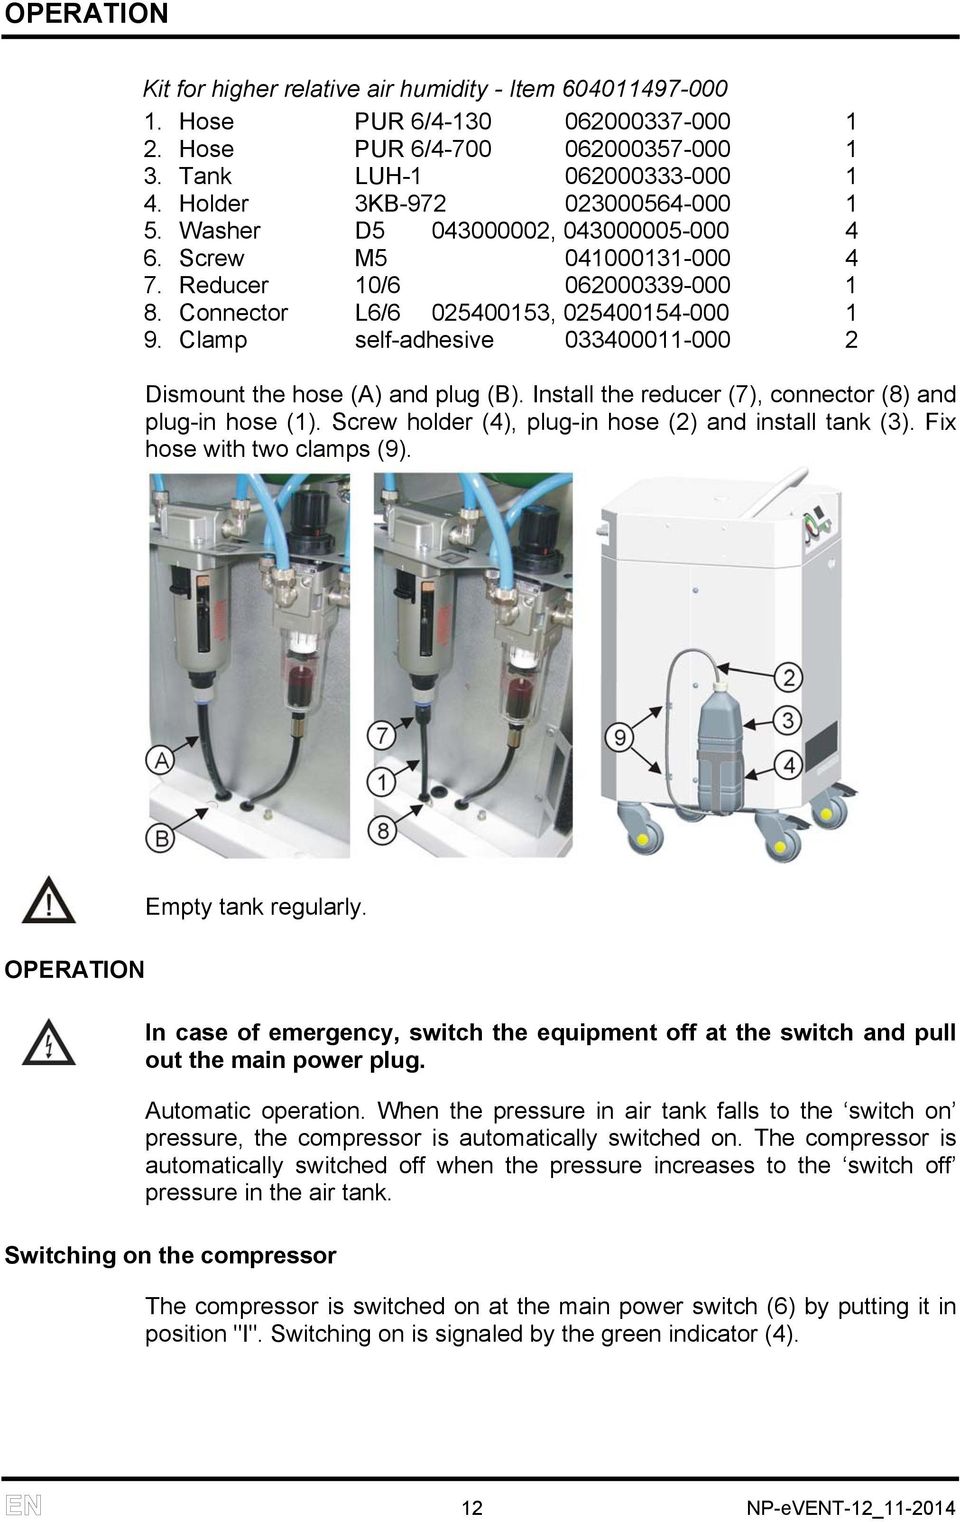 Clamp self-adhesive 033400011-000 2 Dismount the hose (A) and plug (B). Install the reducer (7), connector (8) and plug-in hose (1). Screw holder (4), plug-in hose (2) and install tank (3).